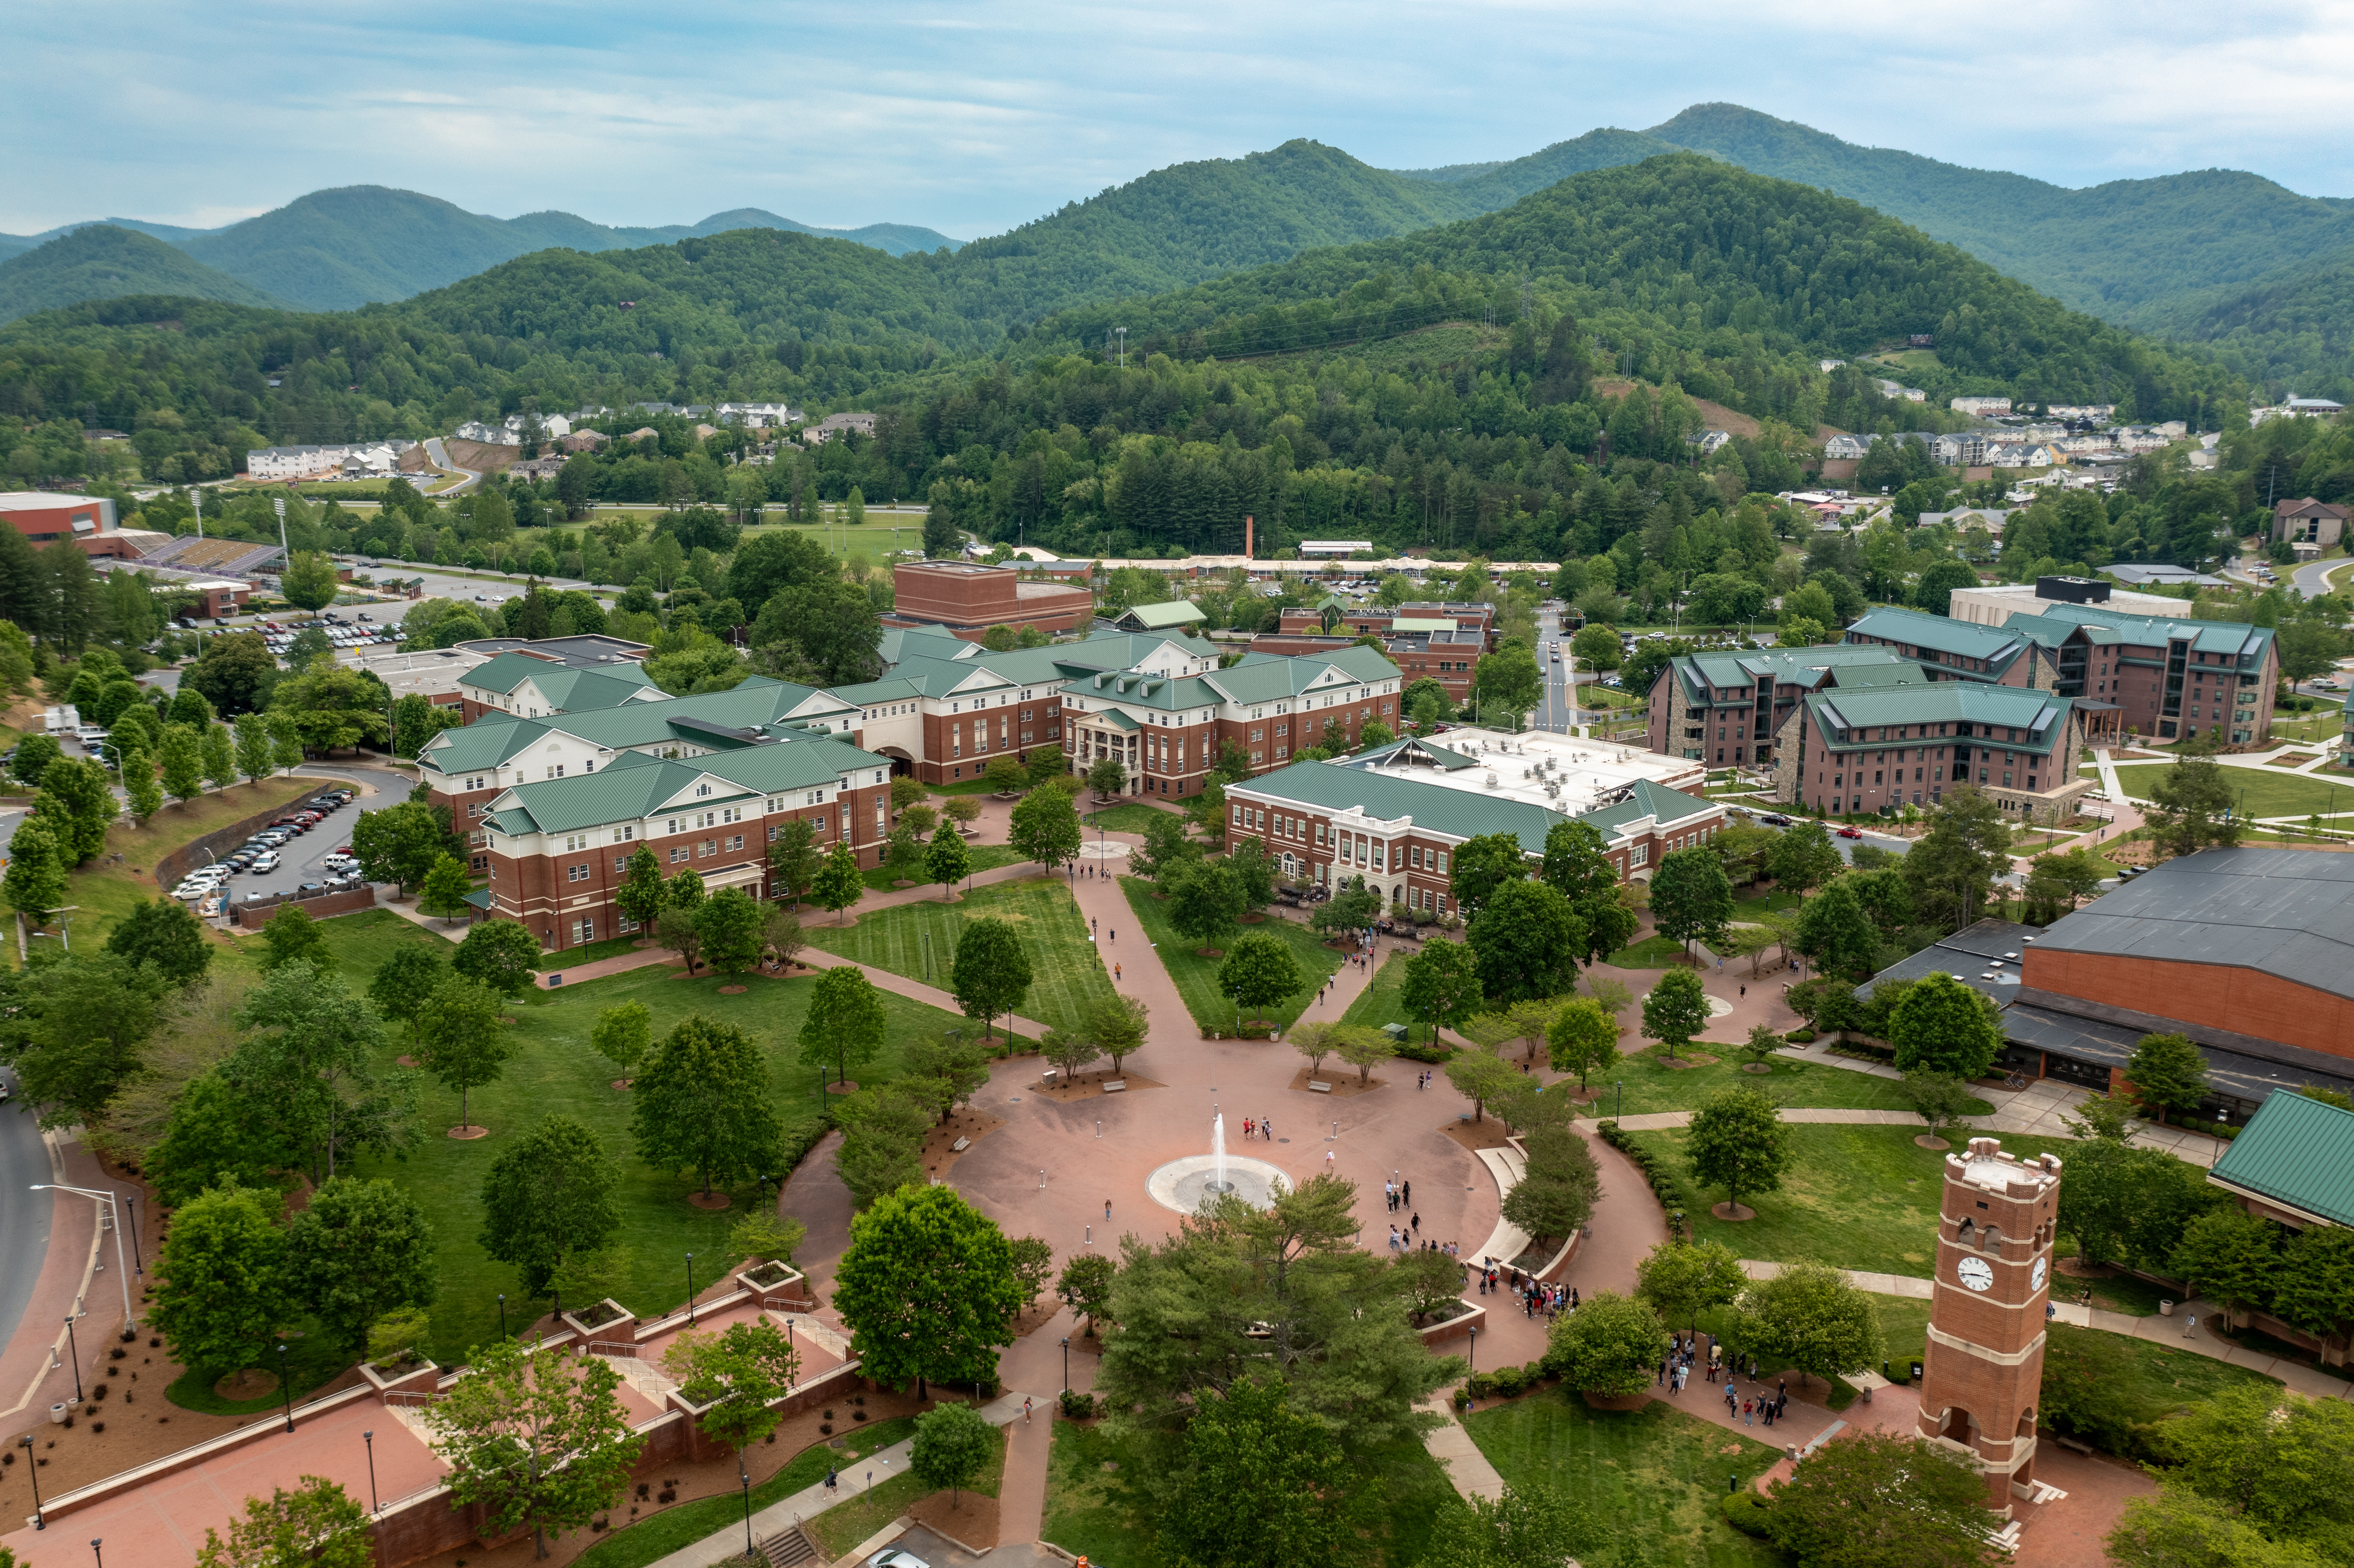  Central Plaza at WCU